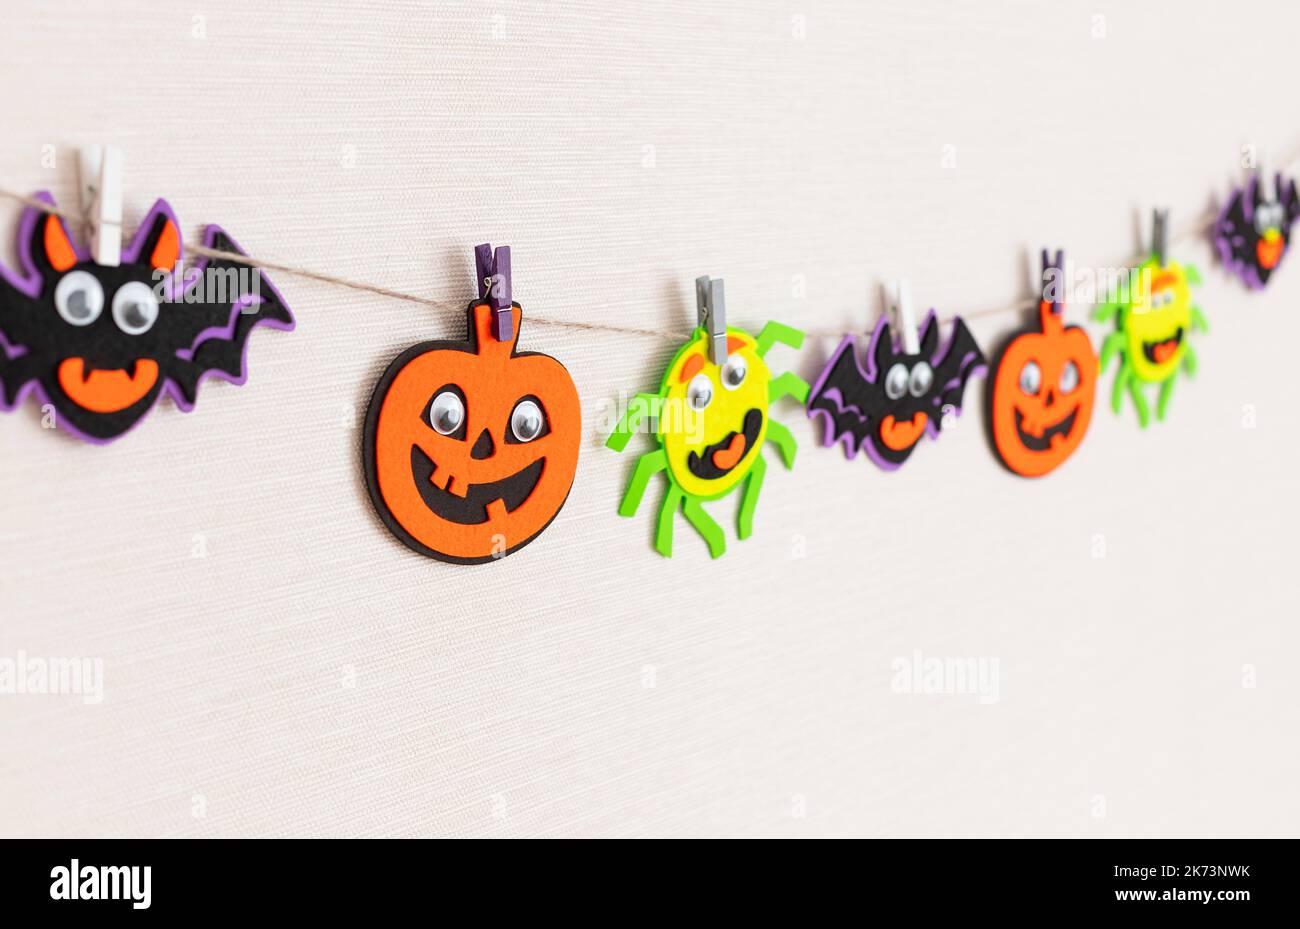 Halloween decoration on wall, felt monsters garland with scary faces Stock Photo